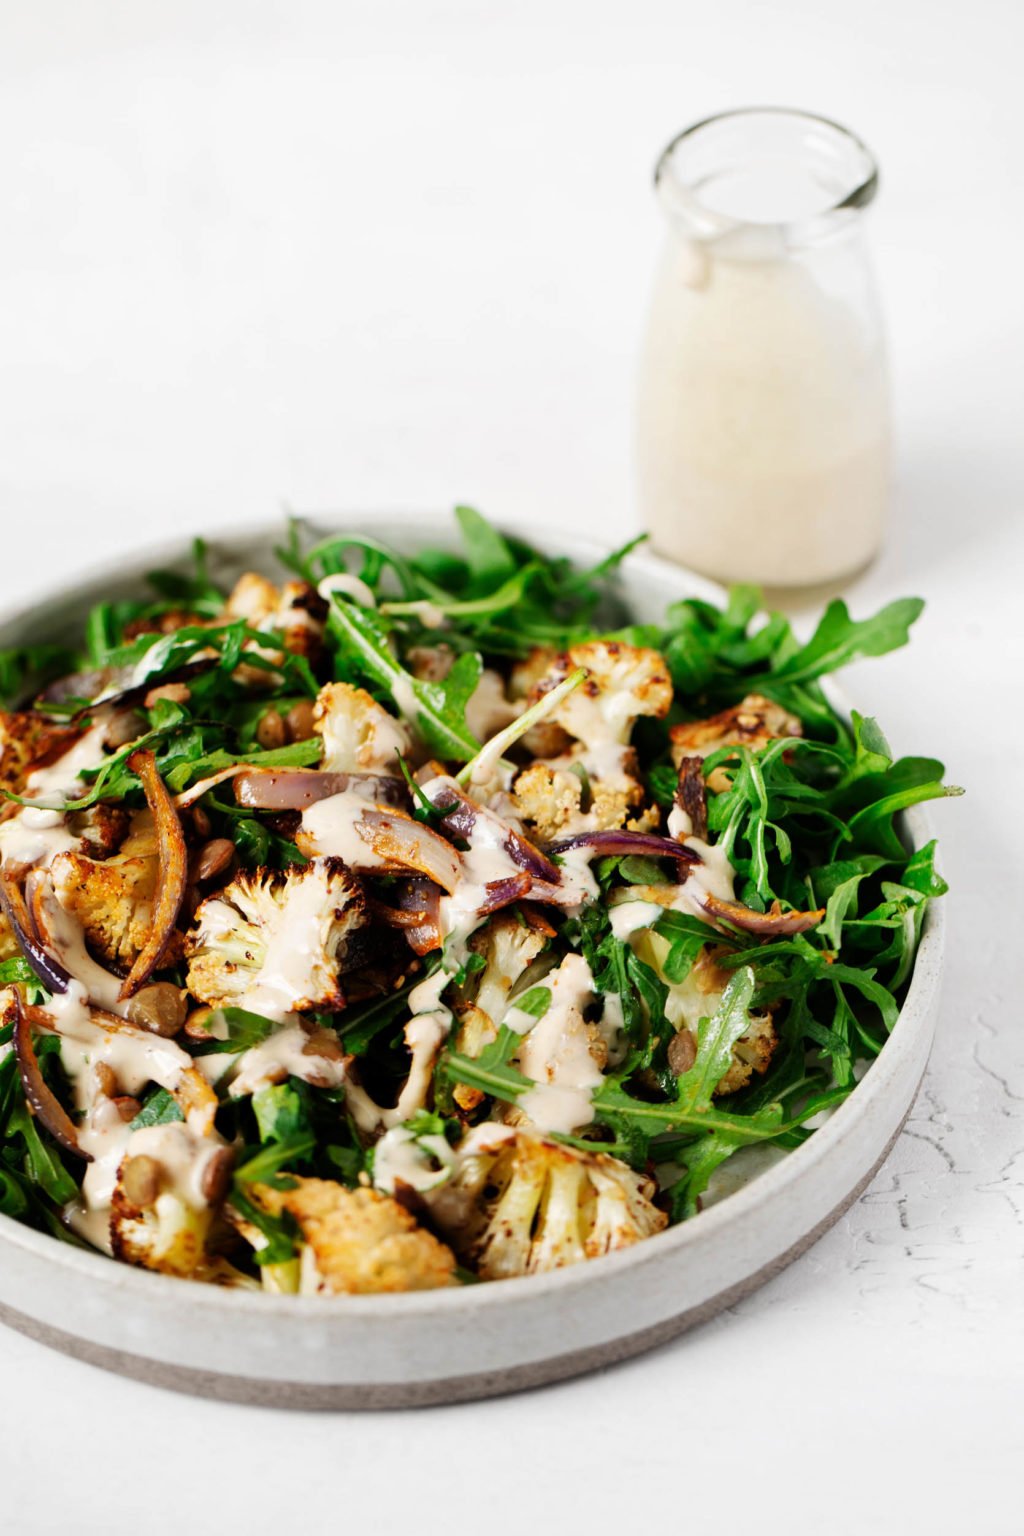 A za'atar roasted cauliflower and green salad has been plated against a white surface. Extra tahini dressing is in a glass container in the background.